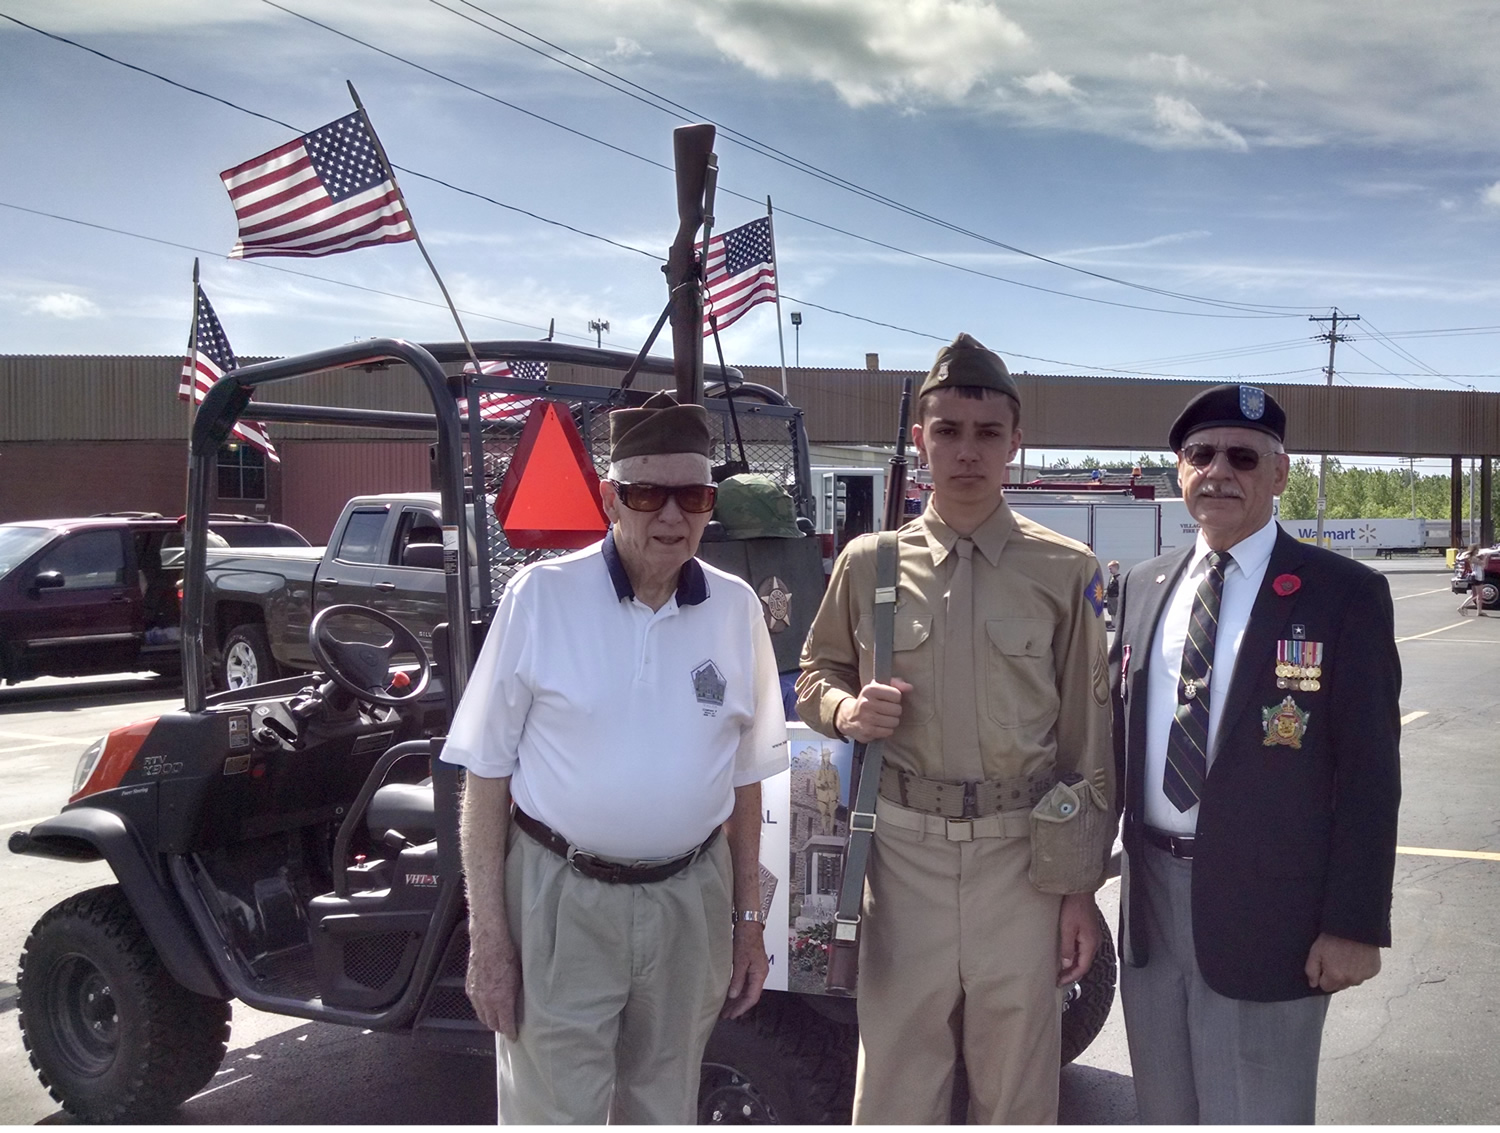 Company F chairman, Bill Menz, "model soldier" Jack Hill and LtCol Richard Glass